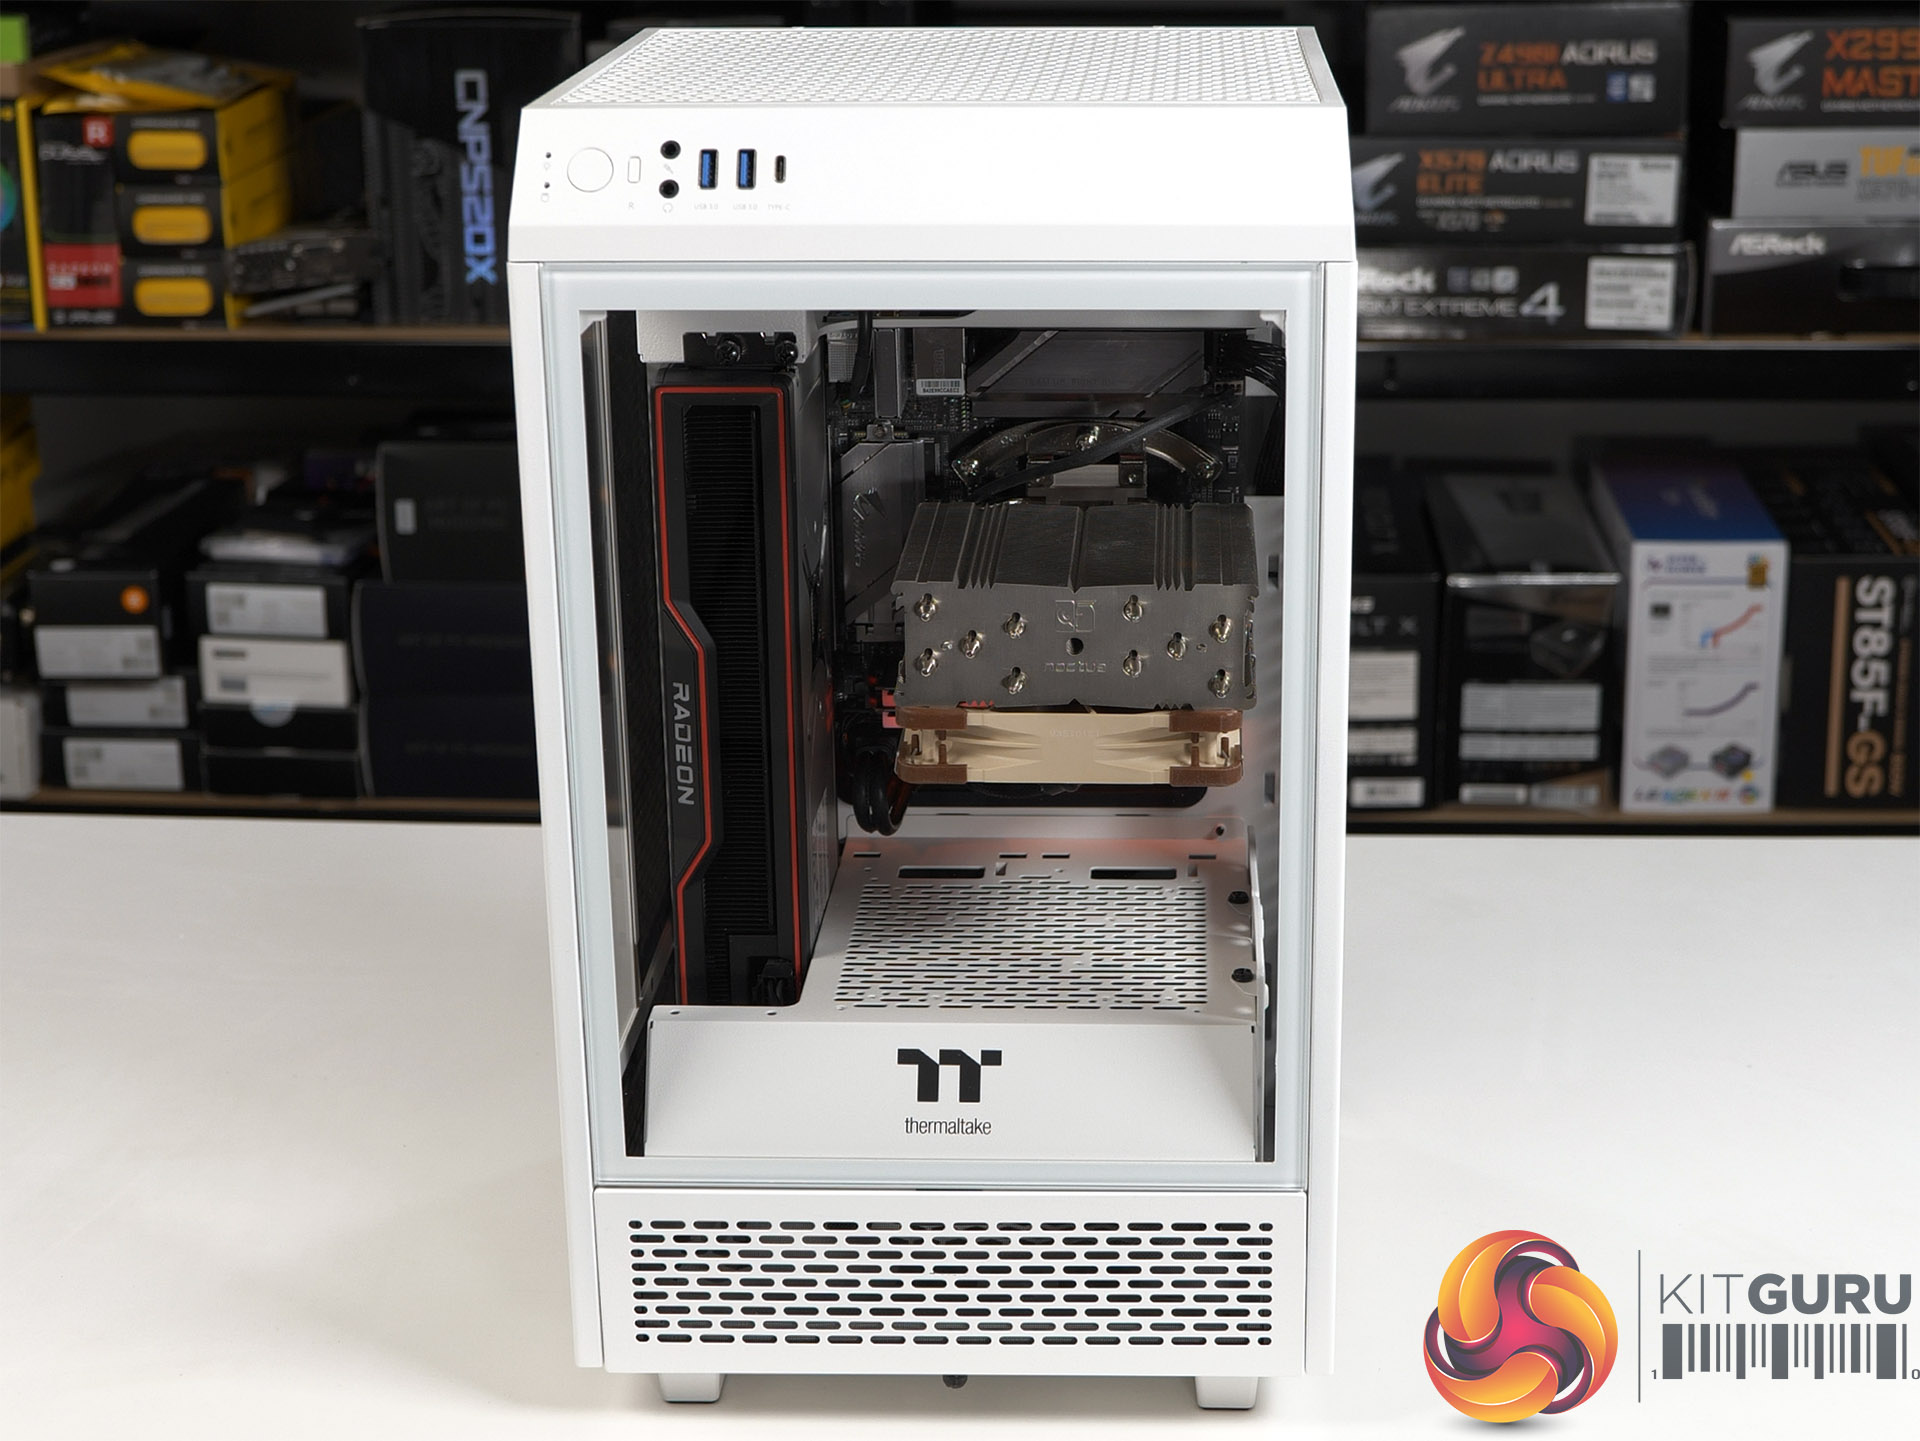 Thermaltake The Tower 100 Snow Edition – World Exclusive Review 